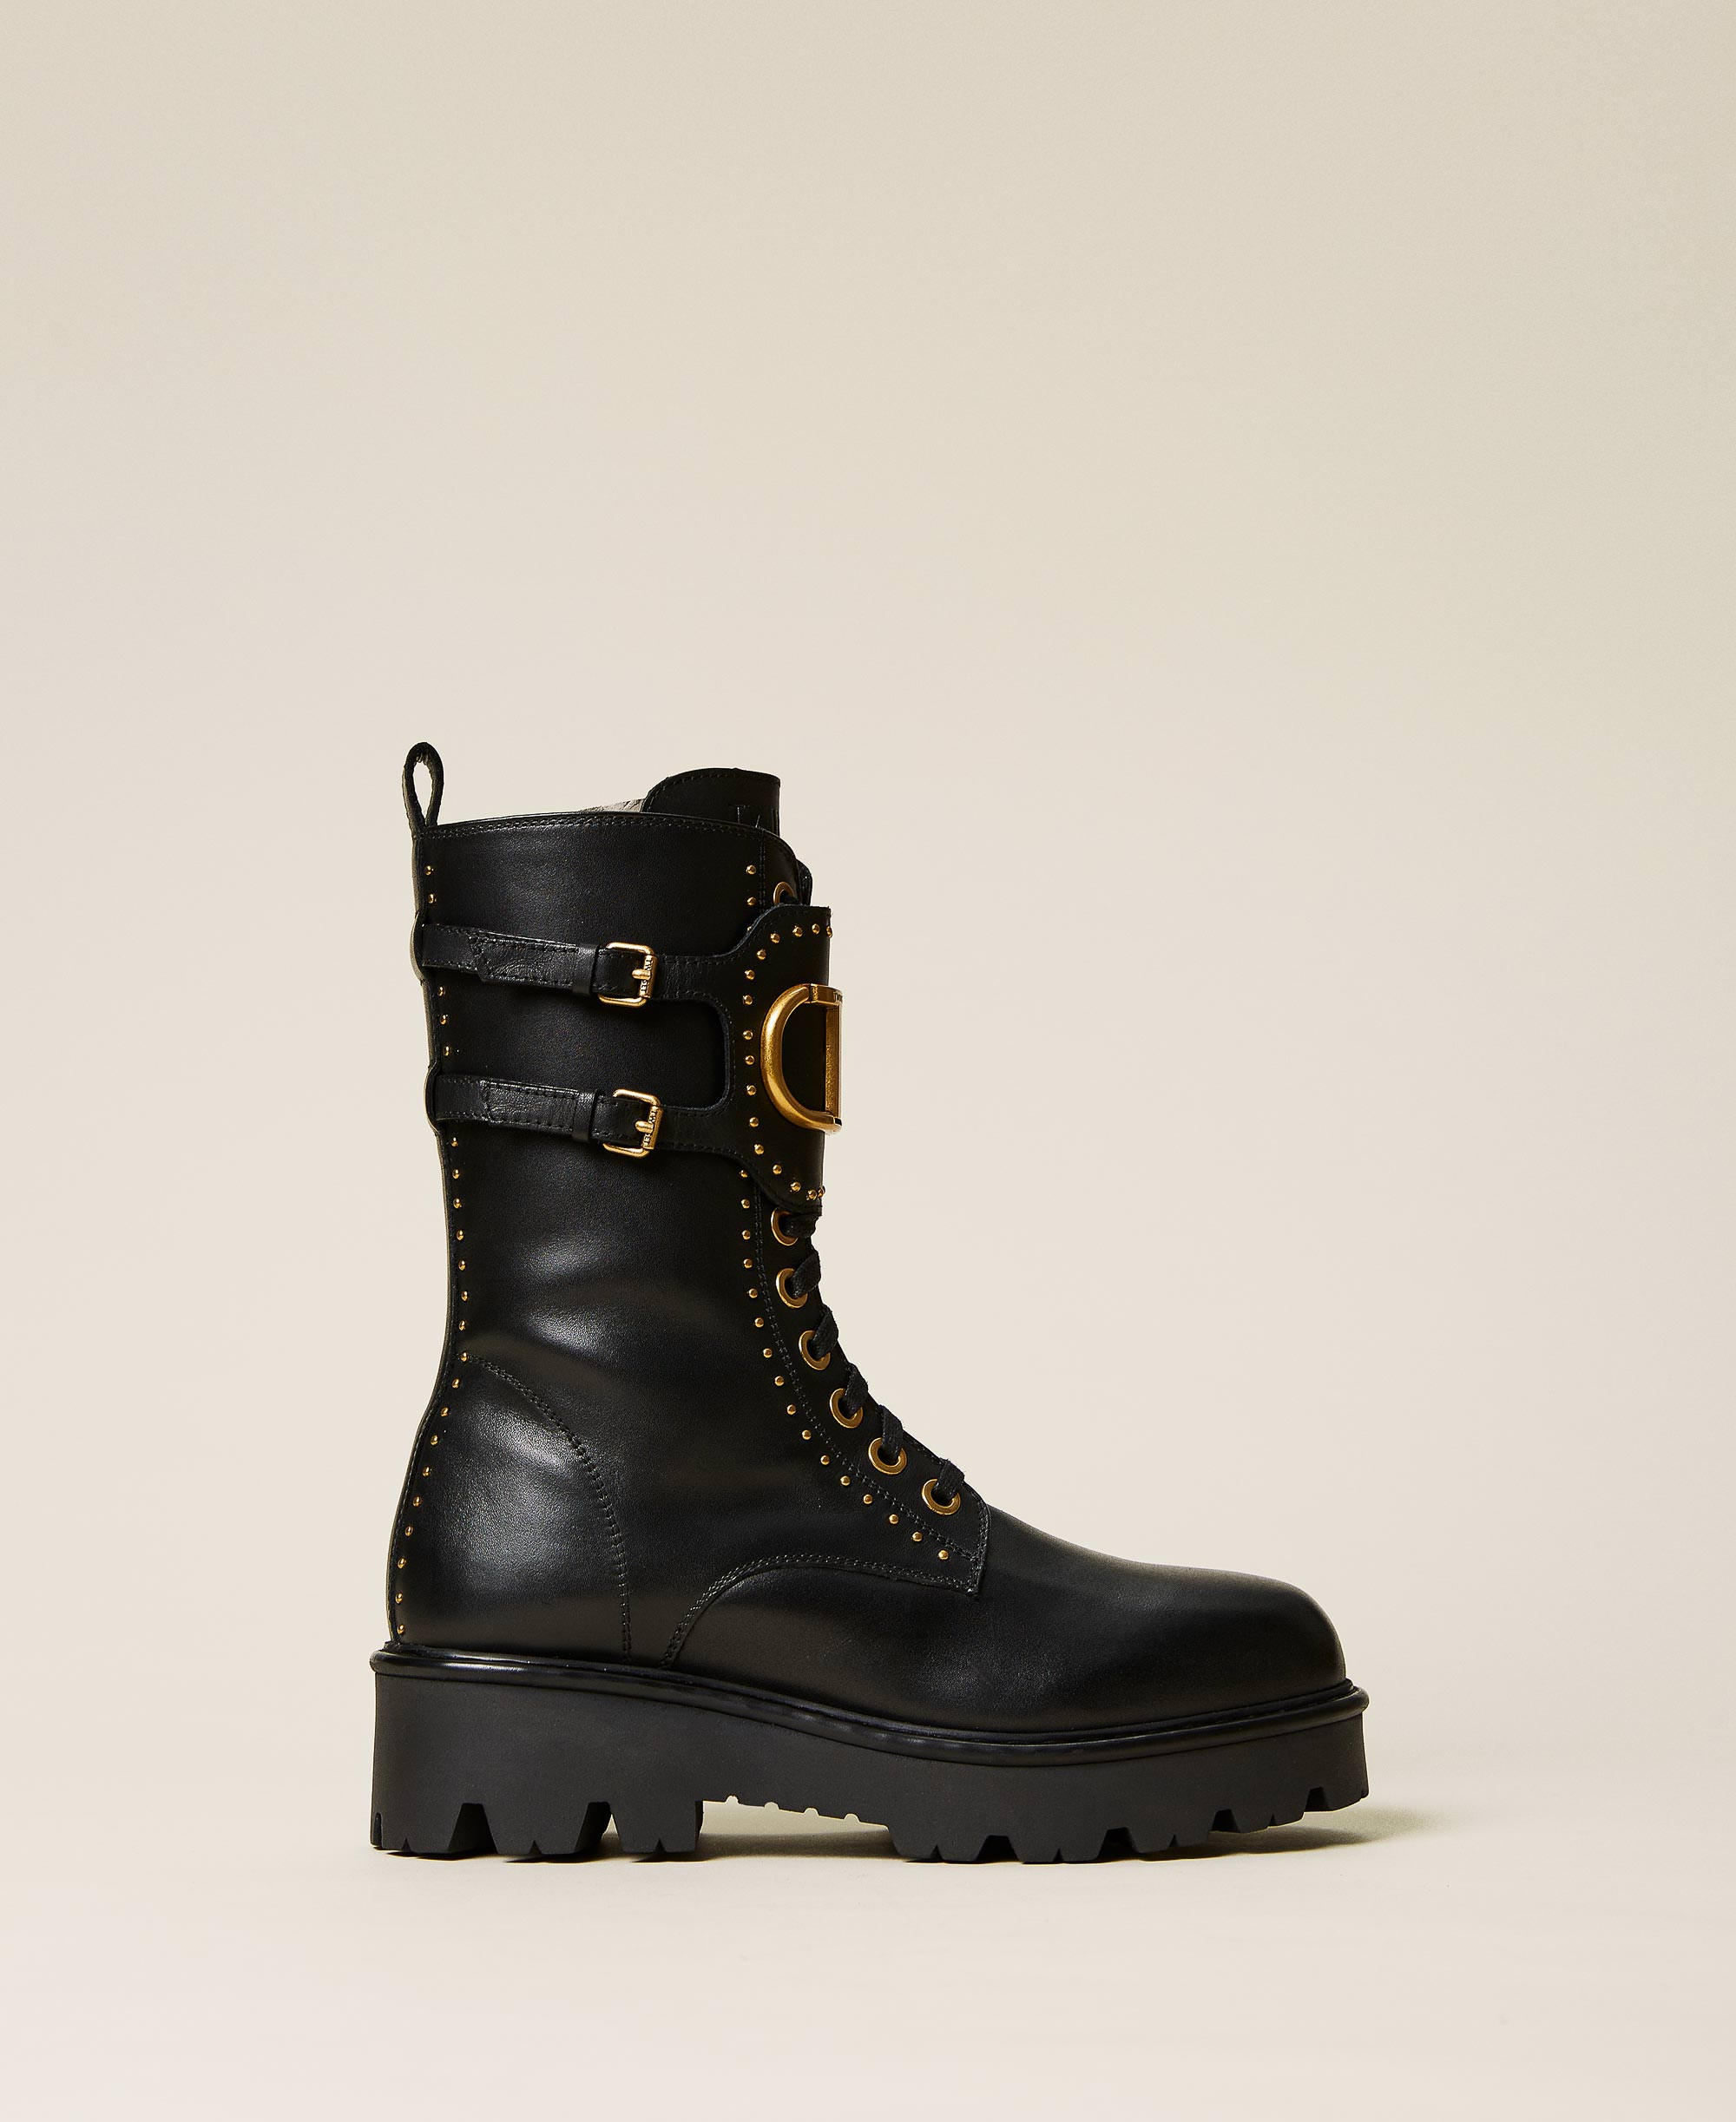 Leather combat boots with rivets and logo